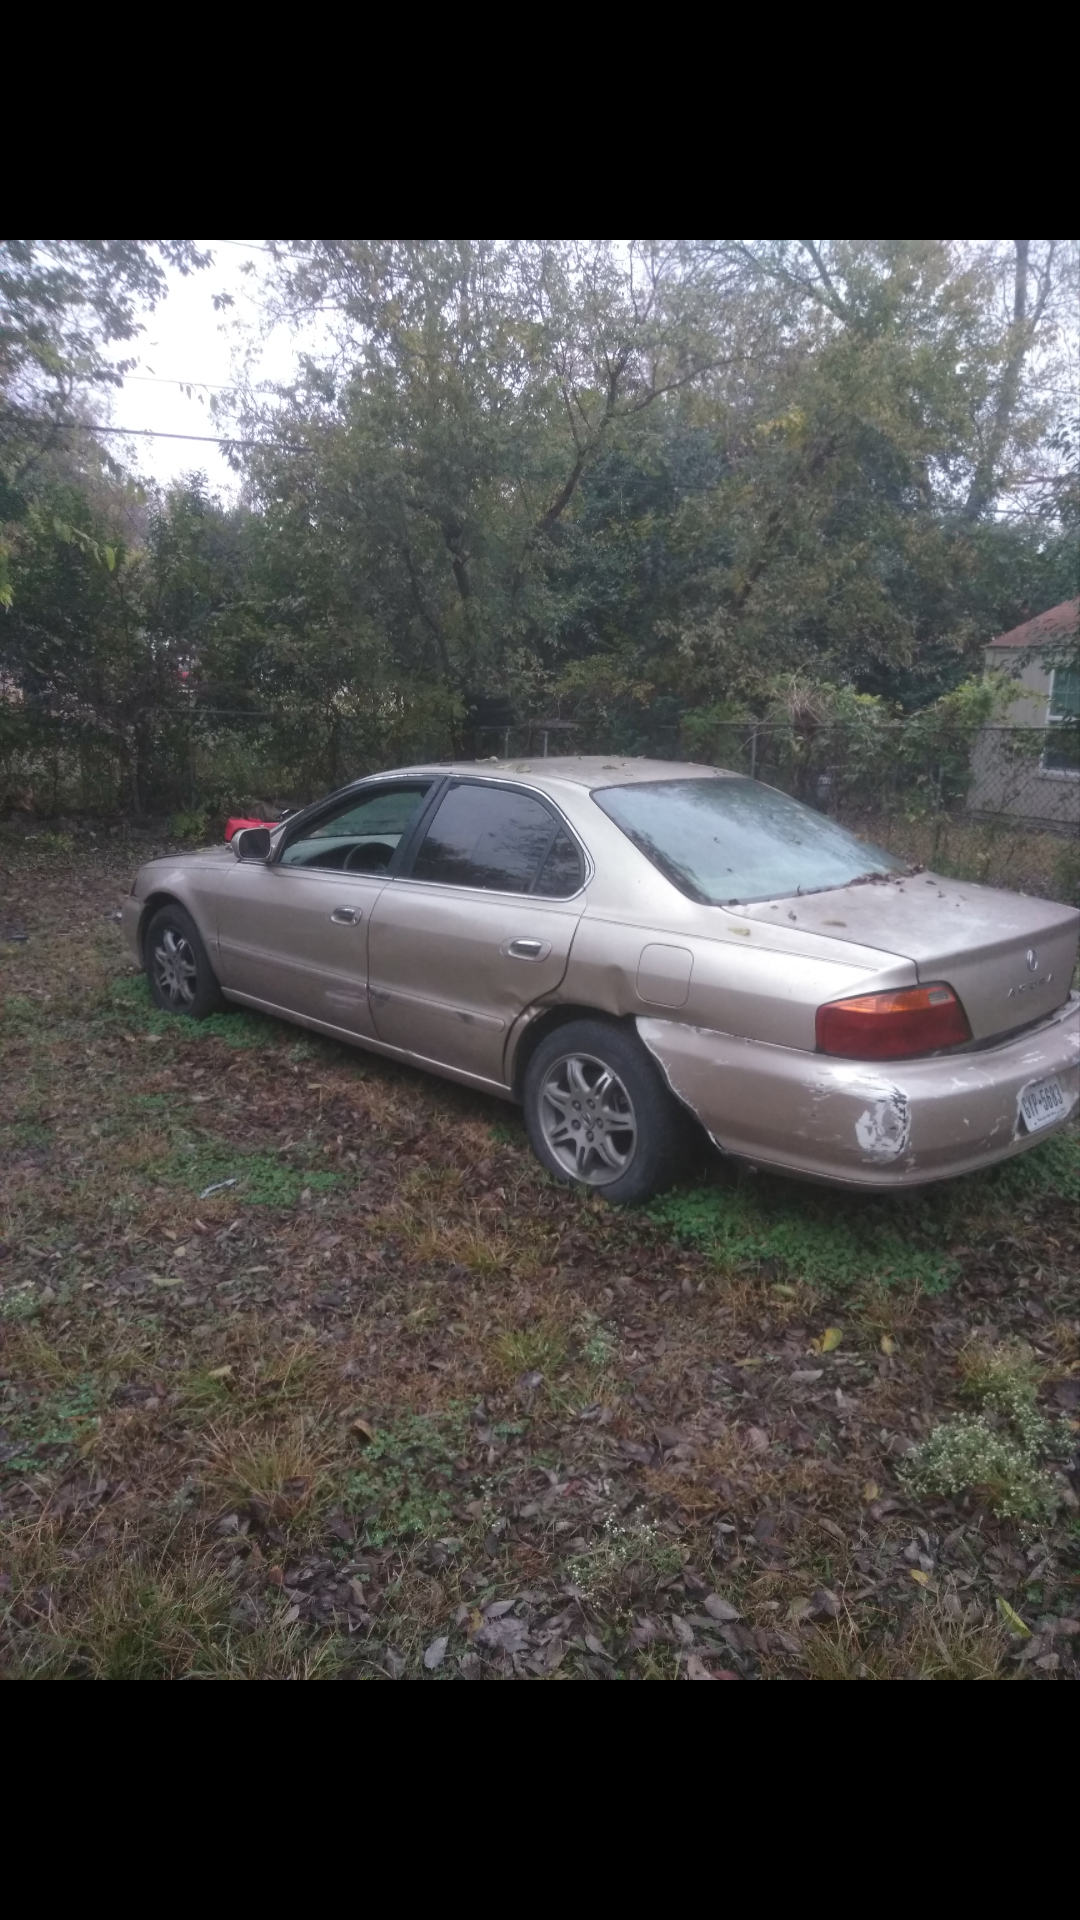 Acura 2001 TL para partes Acura for parts only parts engine is good